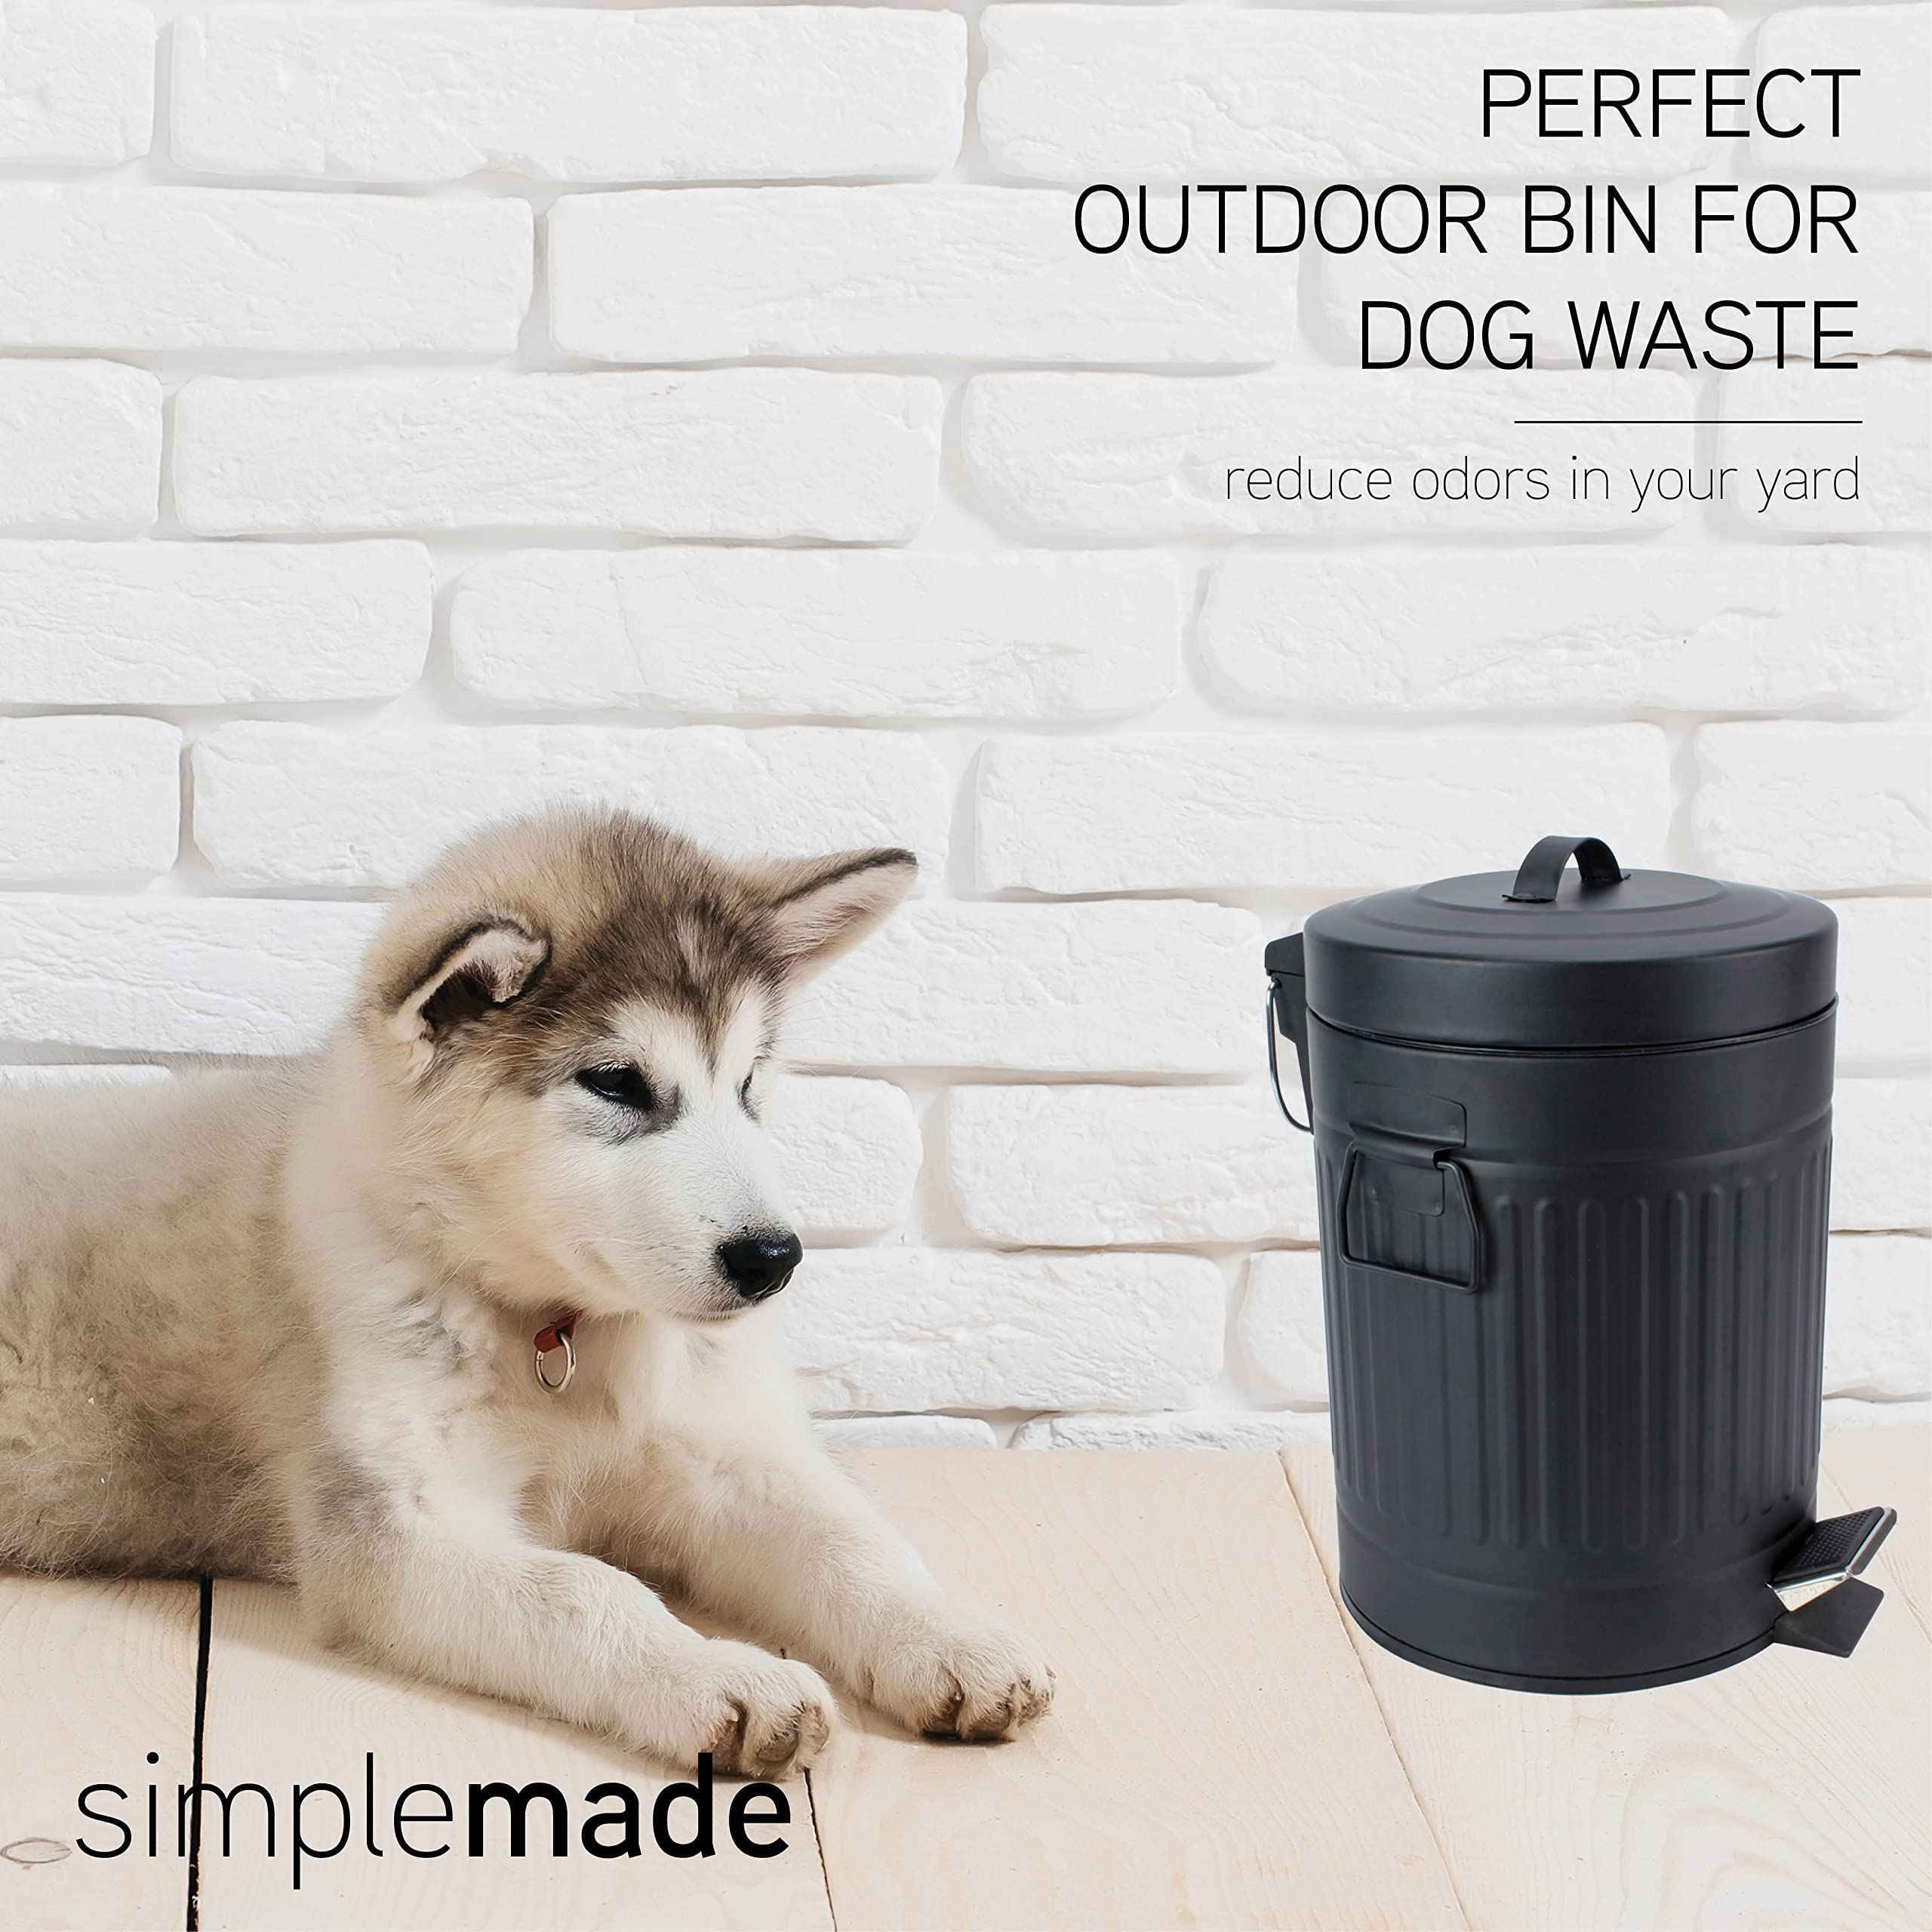 simplemade Round Step Trash Can - 5 Liter / 1.3 Gallon - Black Stainless Steel Bathroom Trash Can | Small Trash Can with Lid | Office Trash Can | Small Garbage Can with Lid | Metal Wastebasket  - Very Good